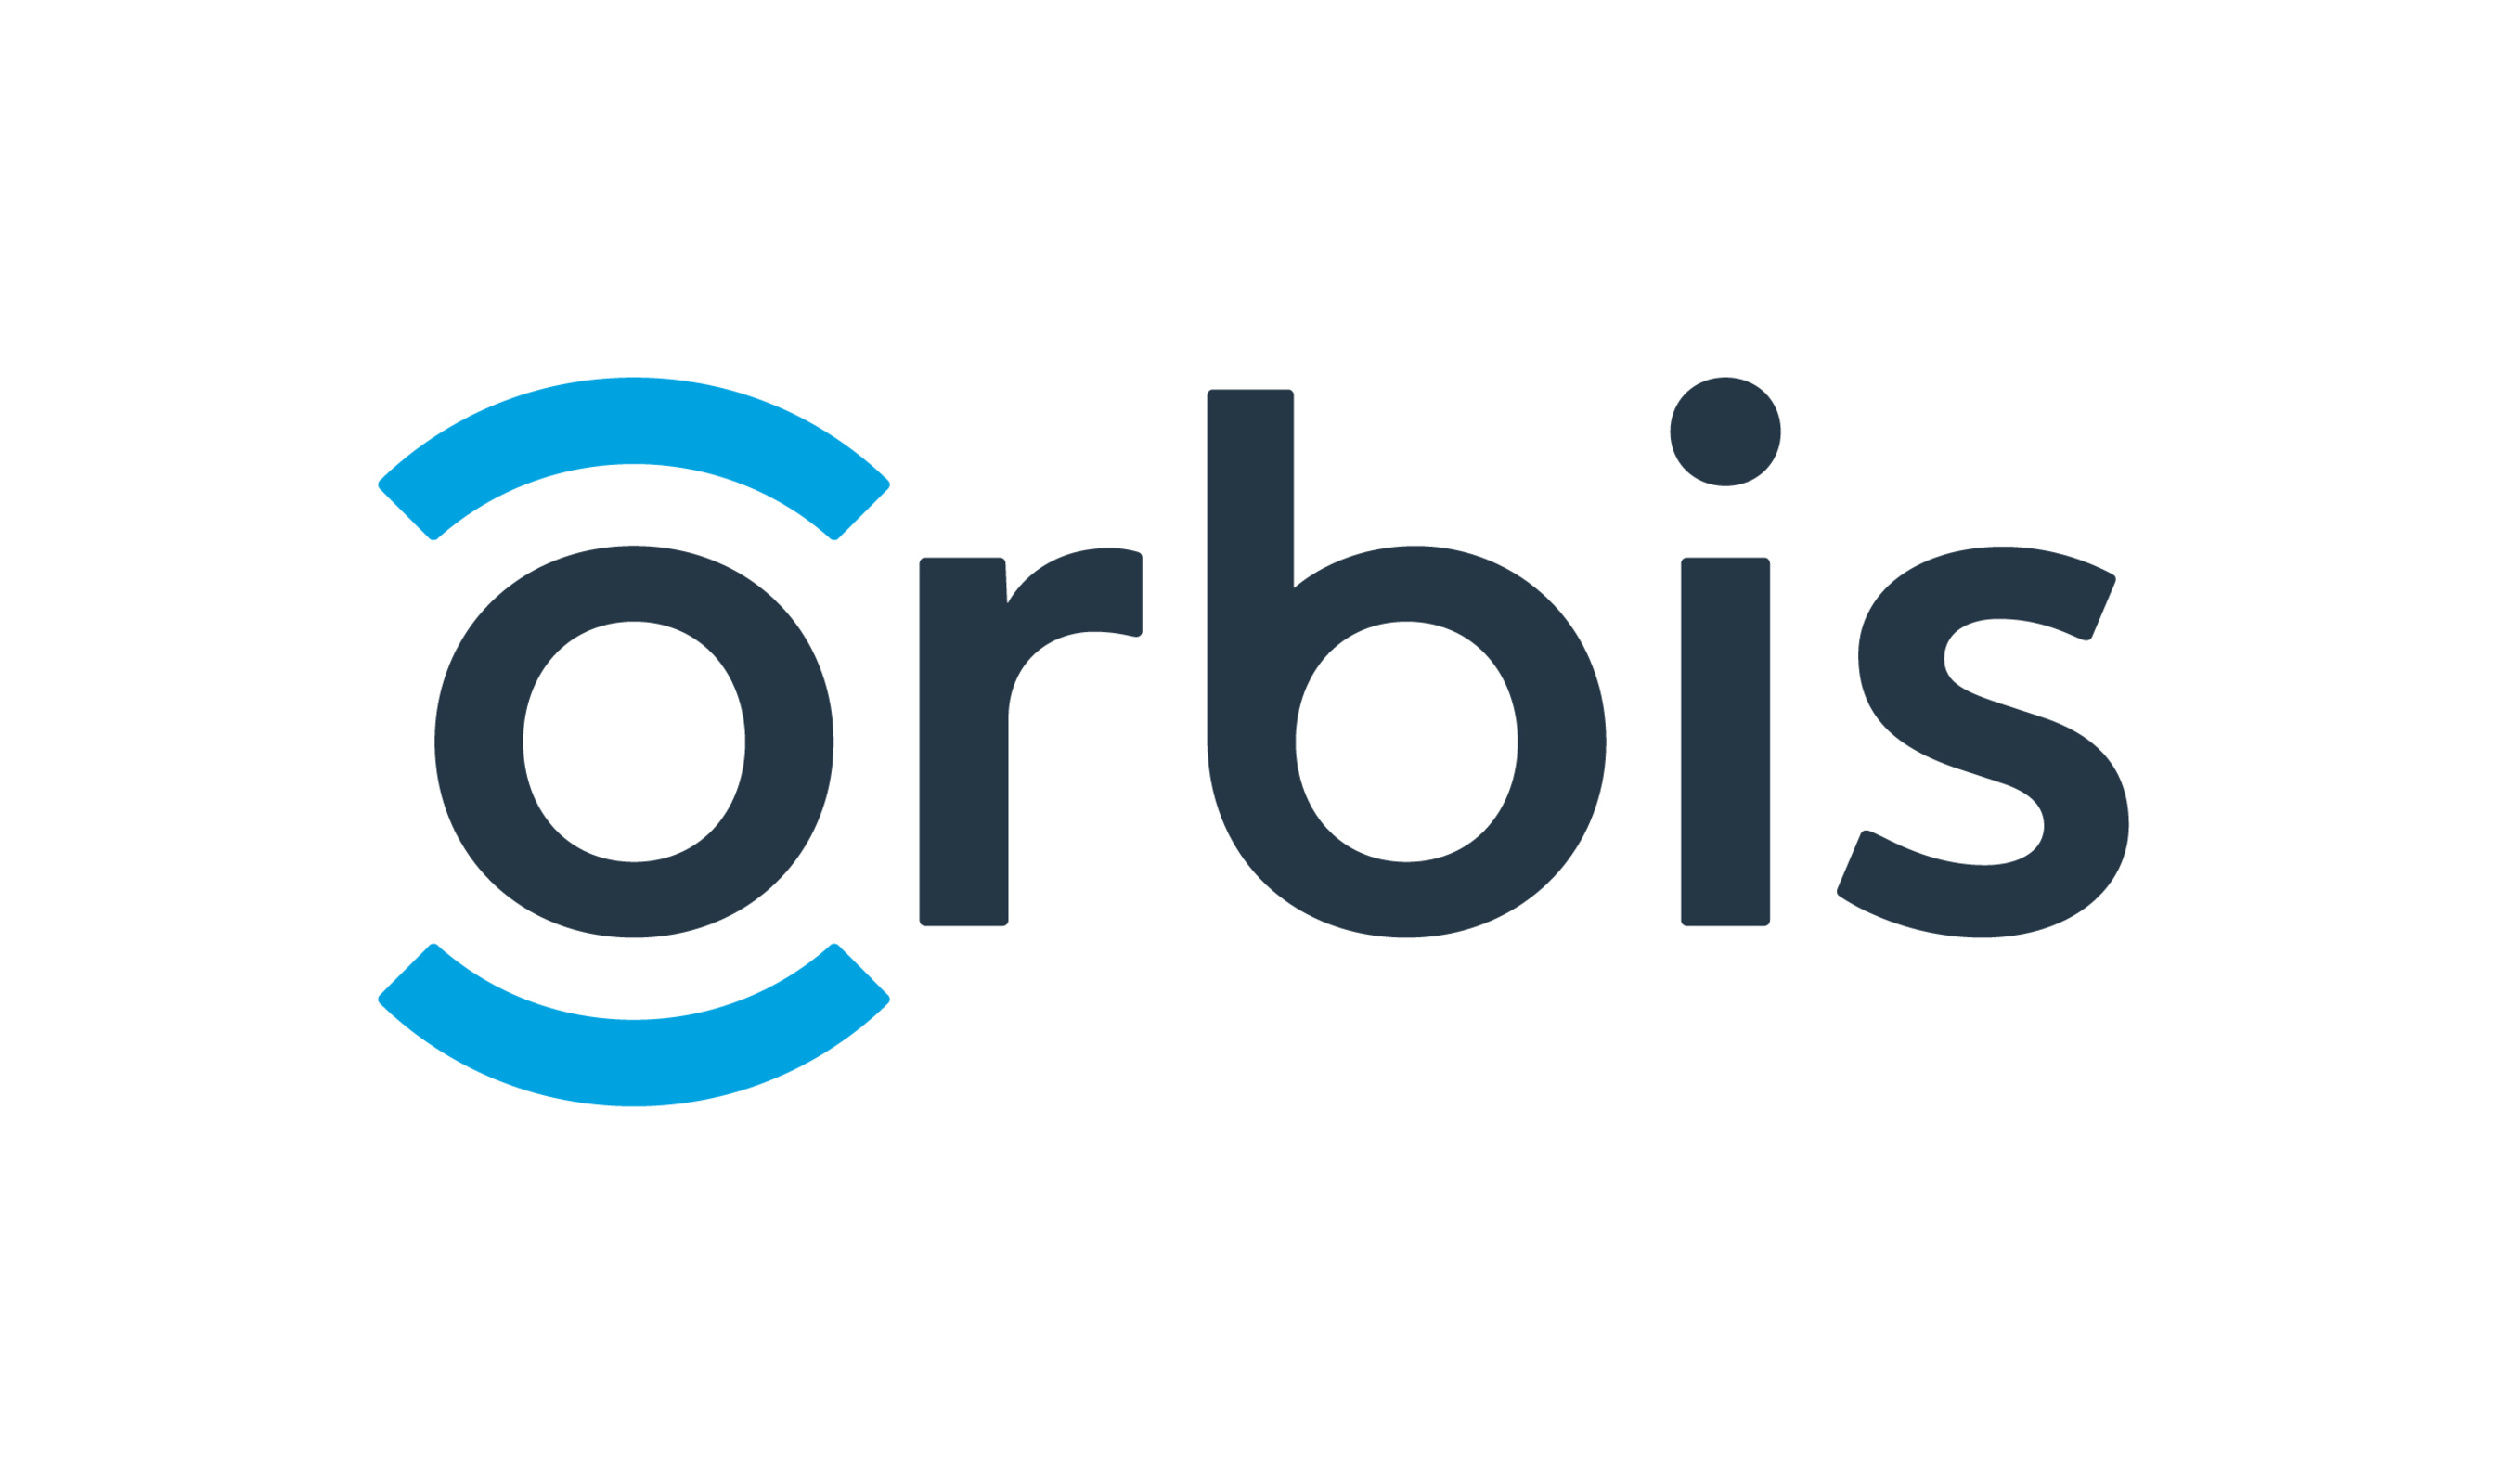 The new website was created utilizing Orbis's new brand identity. After more than 30 years in the field of global eye health, Orbis launched this new brand identity to better showcase the impact that it brings to institutions, communities and individuals around the world. Learn more: www.orbis.org (PRNewsFoto/Orbis)